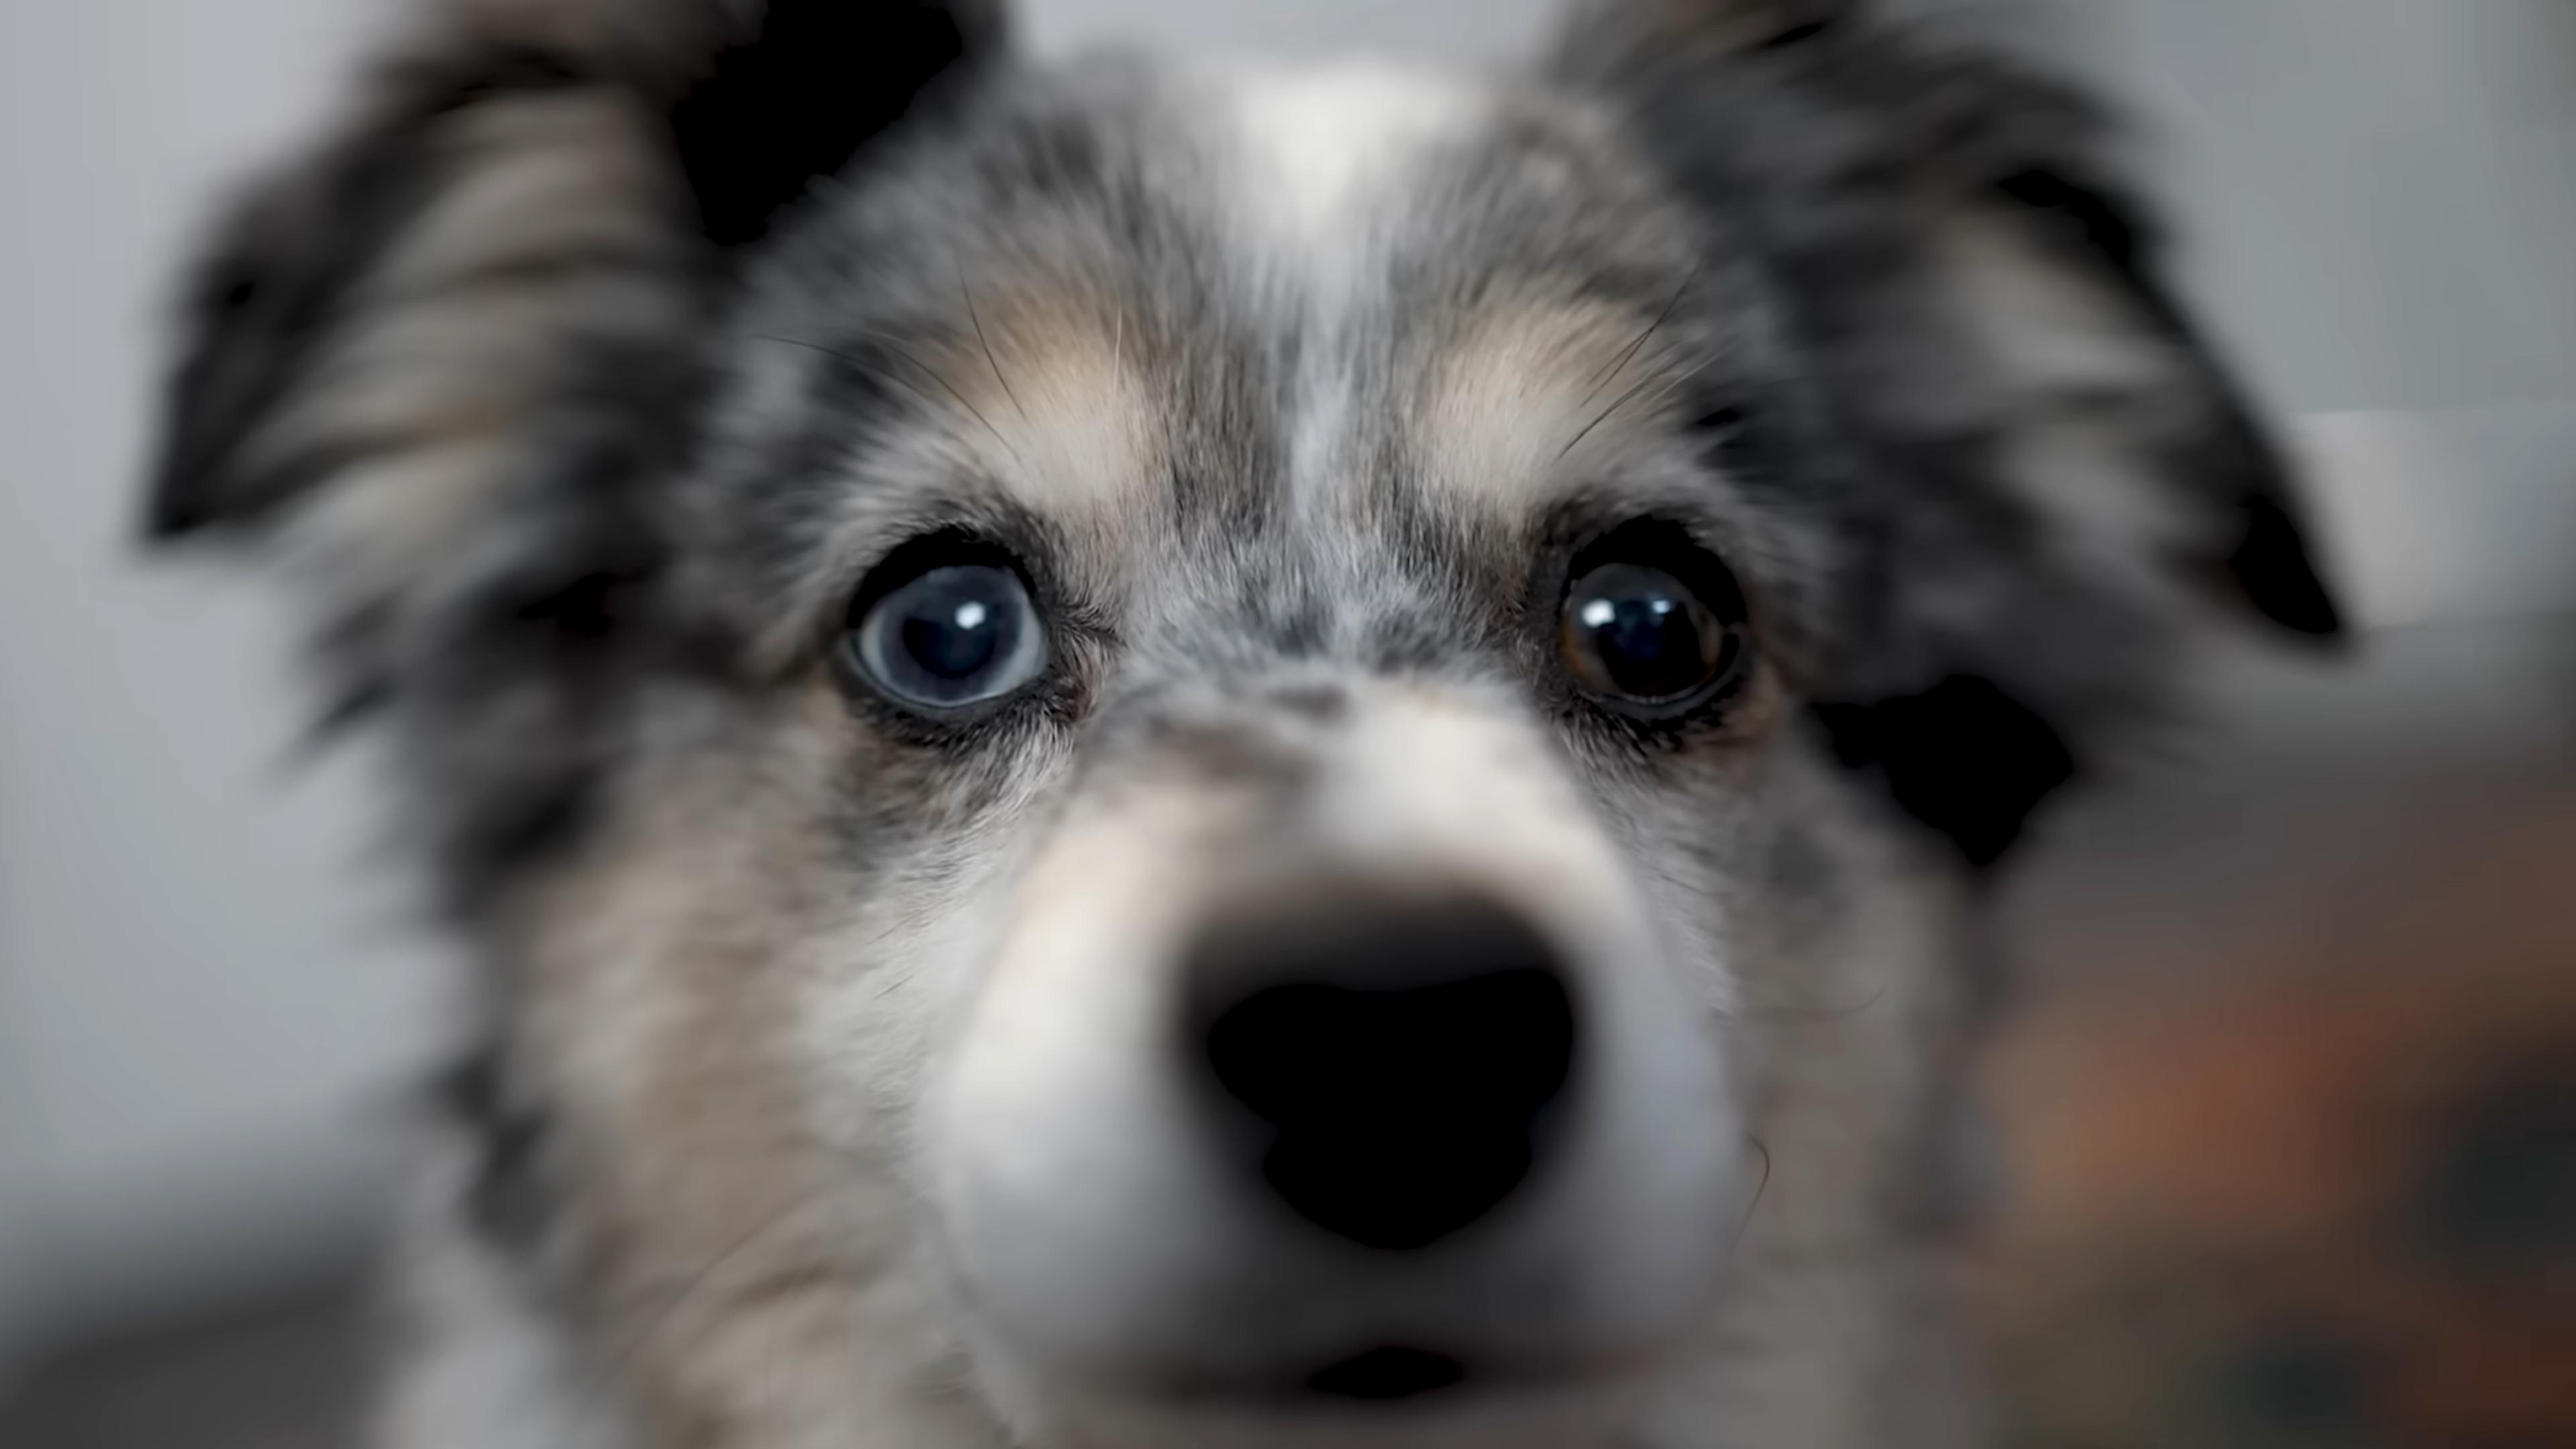 Close-up of a dog with blue and brown eyes, grey and white fur, looking directly at the camera.